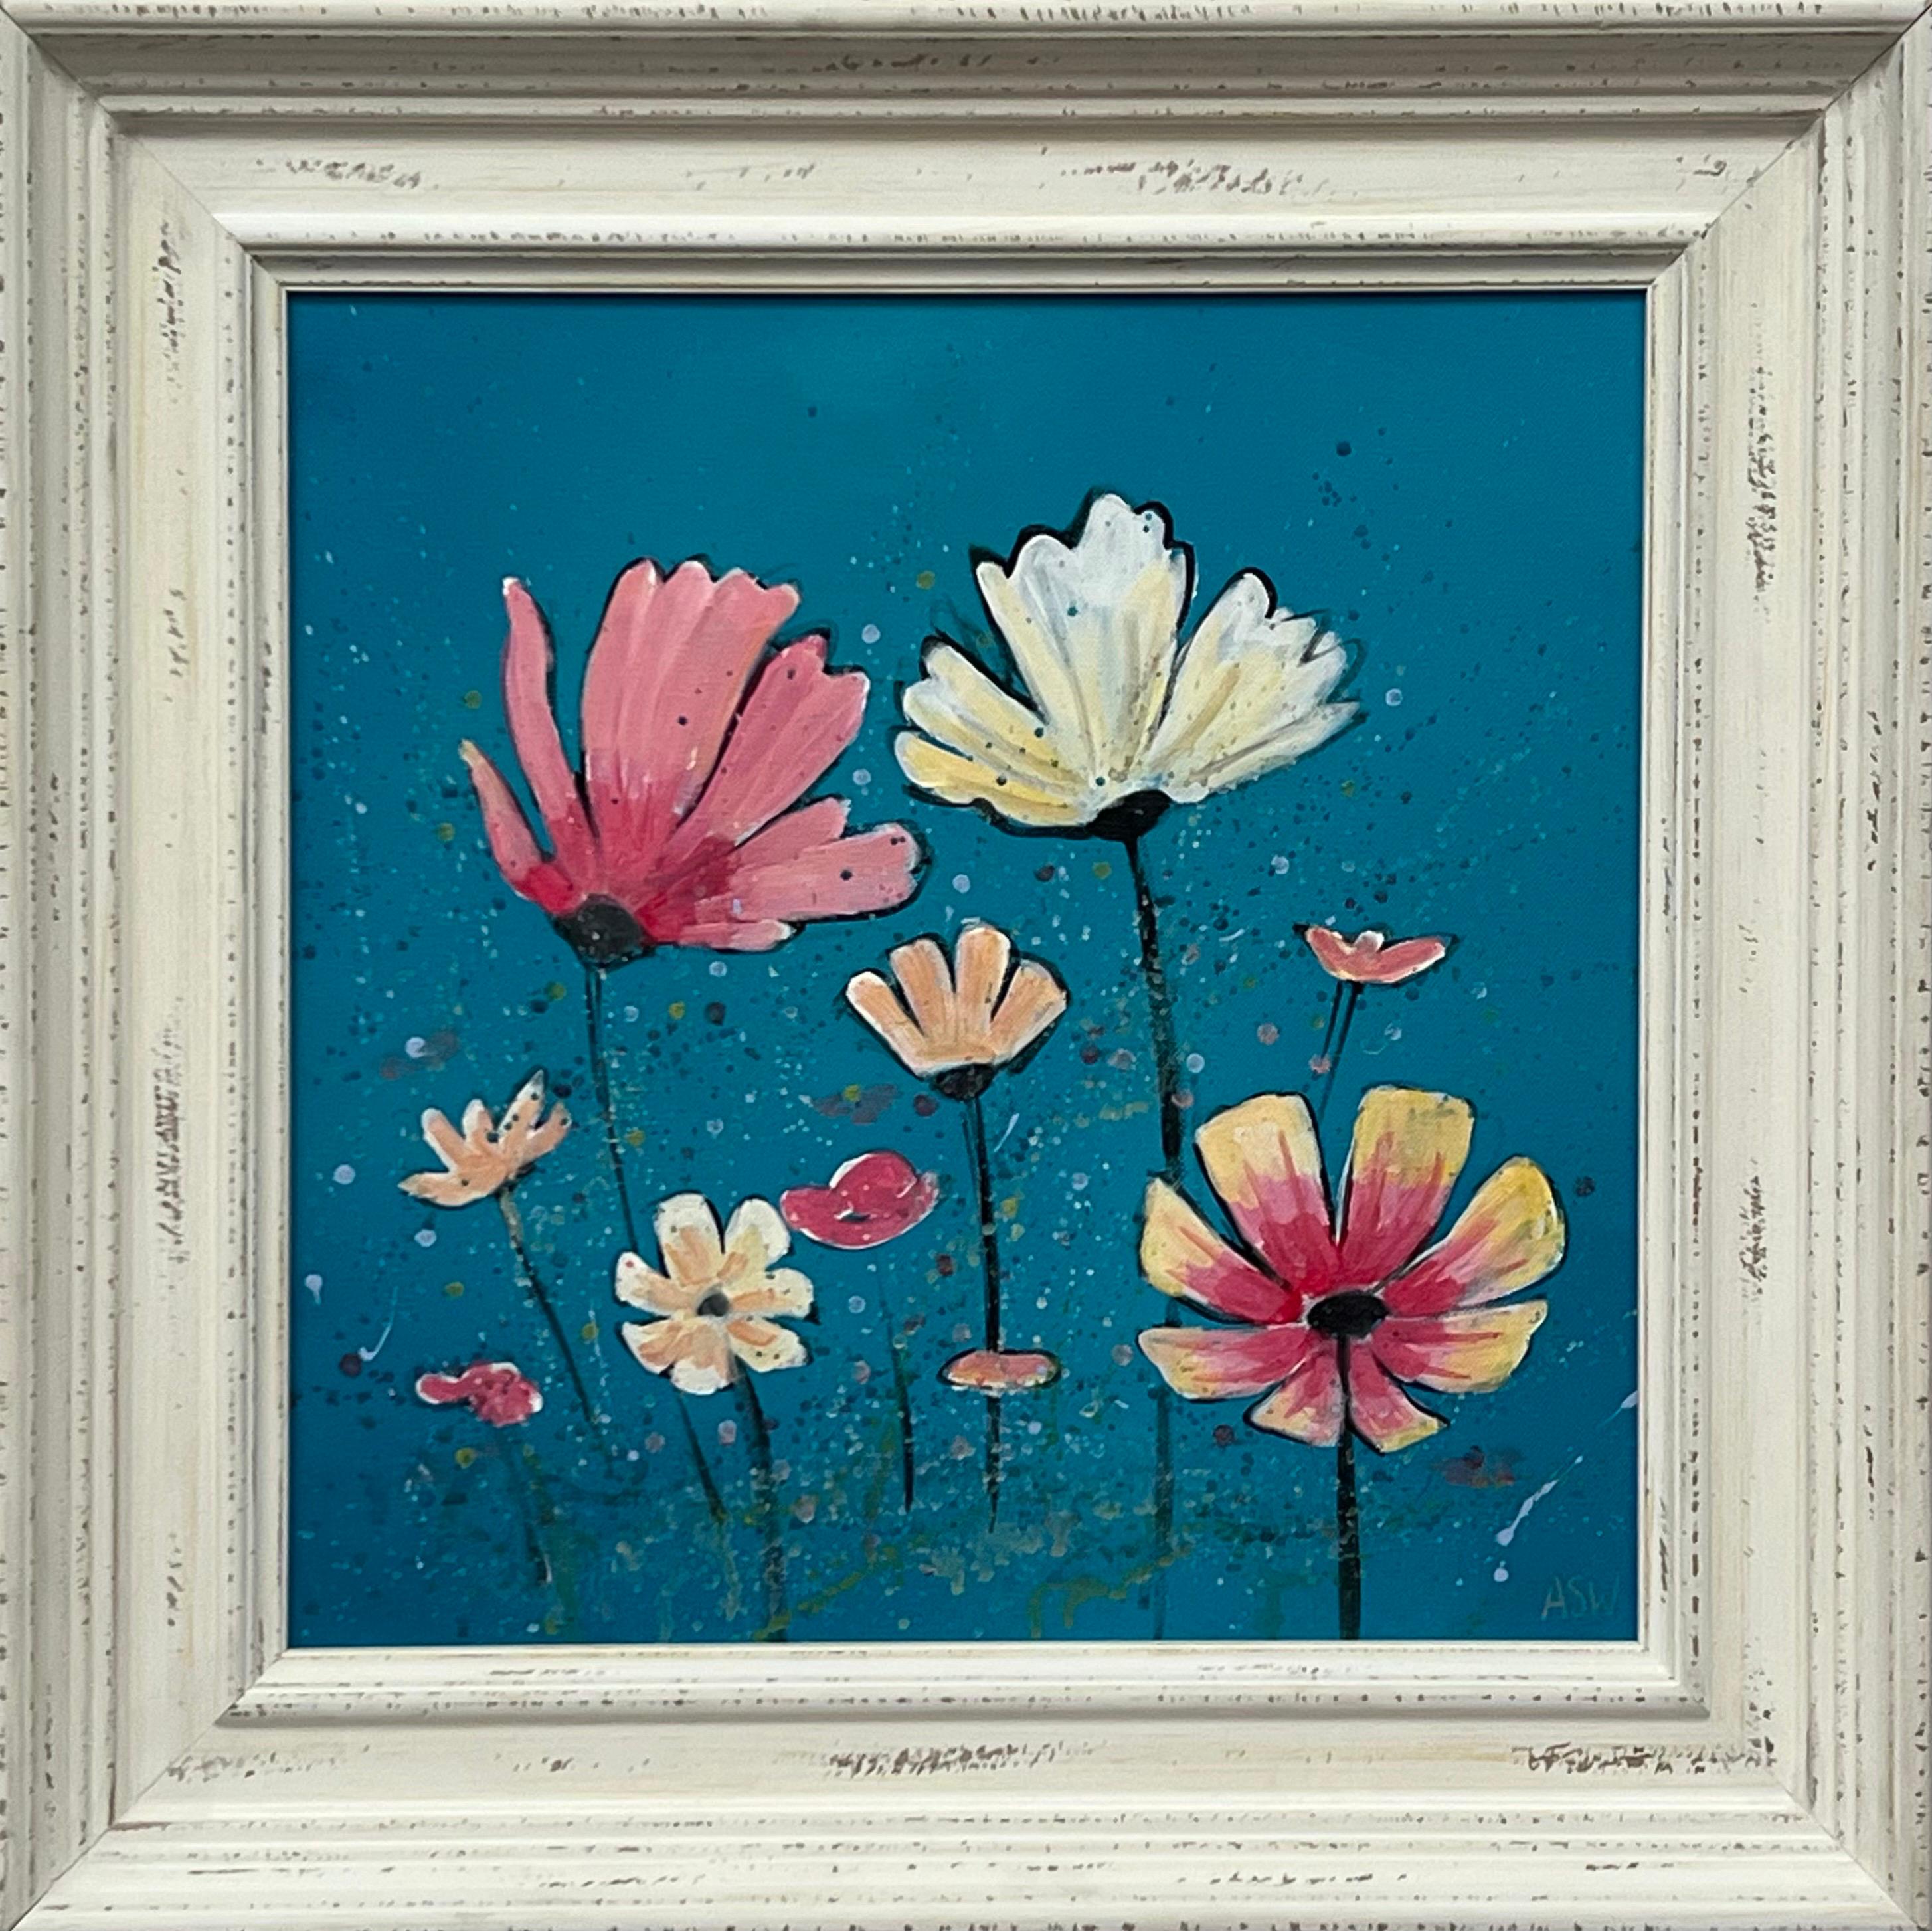 Angela Wakefield Landscape Painting - Design Study of Wild Pink & White Flowers on Turquoise by Contemporary Artist